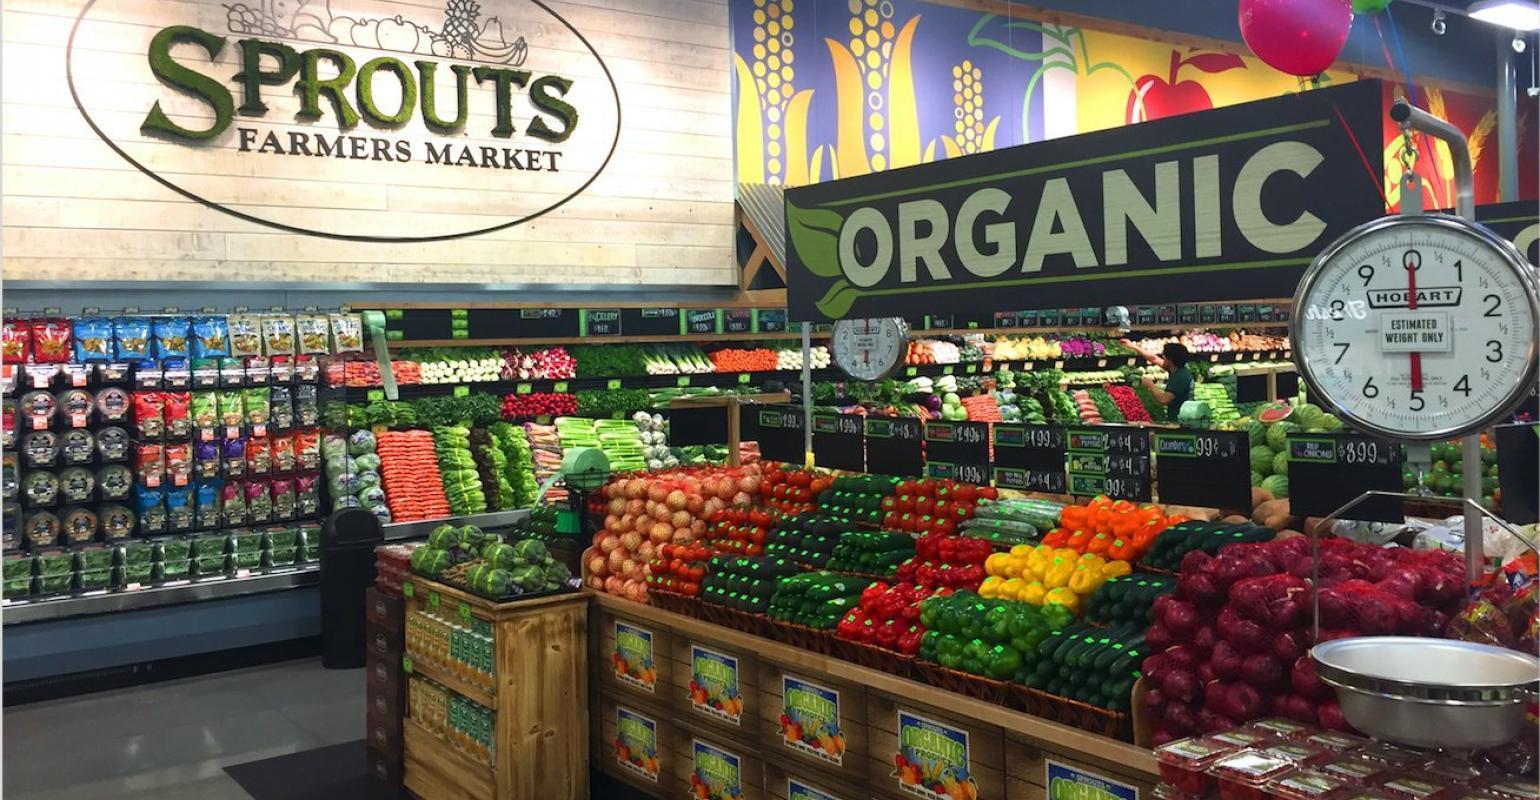 Growth stands out for Sprouts Farmers Market in 4Q, FY 2022